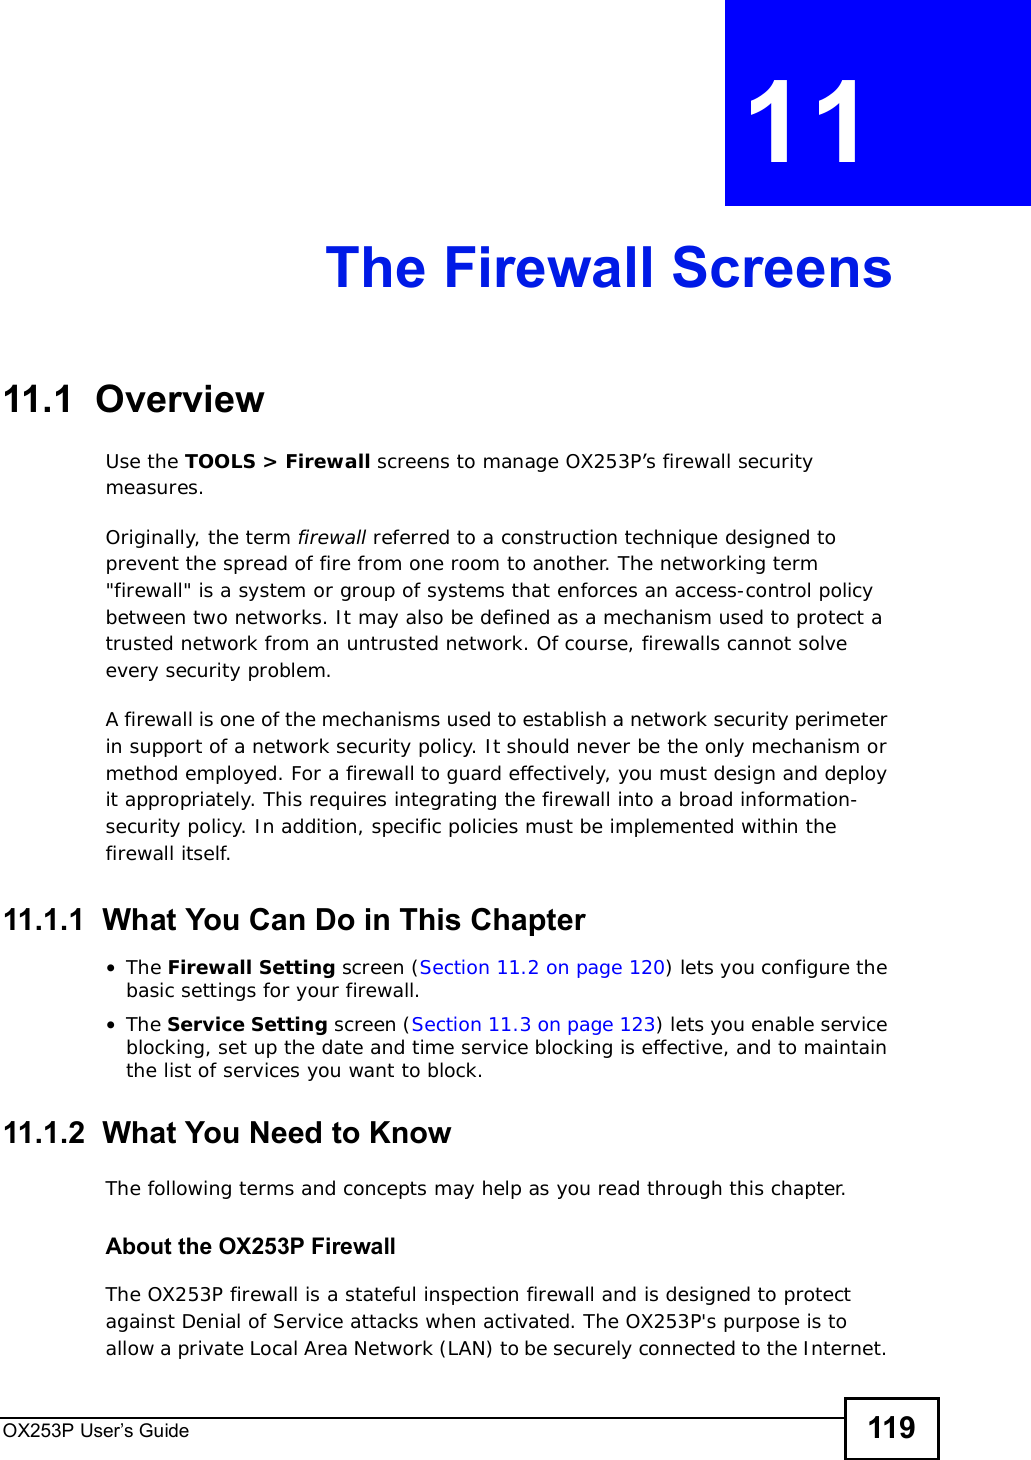 OX253P User’s Guide 119CHAPTER 11 The Firewall Screens11.1  OverviewUse the TOOLS &gt; Firewall screens to manage OX253P’s firewall security measures.Originally, the term firewall referred to a construction technique designed to prevent the spread of fire from one room to another. The networking term &quot;firewall&quot; is a system or group of systems that enforces an access-control policy between two networks. It may also be defined as a mechanism used to protect a trusted network from an untrusted network. Of course, firewalls cannot solve every security problem.A firewall is one of the mechanisms used to establish a network security perimeter in support of a network security policy. It should never be the only mechanism or method employed. For a firewall to guard effectively, you must design and deploy it appropriately. This requires integrating the firewall into a broad information-security policy. In addition, specific policies must be implemented within the firewall itself.11.1.1  What You Can Do in This Chapter•The Firewall Setting screen (Section 11.2 on page 120) lets you configure the basic settings for your firewall.•The Service Setting screen (Section 11.3 on page 123) lets you enable service blocking, set up the date and time service blocking is effective, and to maintain the list of services you want to block.11.1.2  What You Need to KnowThe following terms and concepts may help as you read through this chapter.About the OX253P FirewallThe OX253P firewall is a stateful inspection firewall and is designed to protect against Denial of Service attacks when activated. The OX253P&apos;s purpose is to allow a private Local Area Network (LAN) to be securely connected to the Internet. 